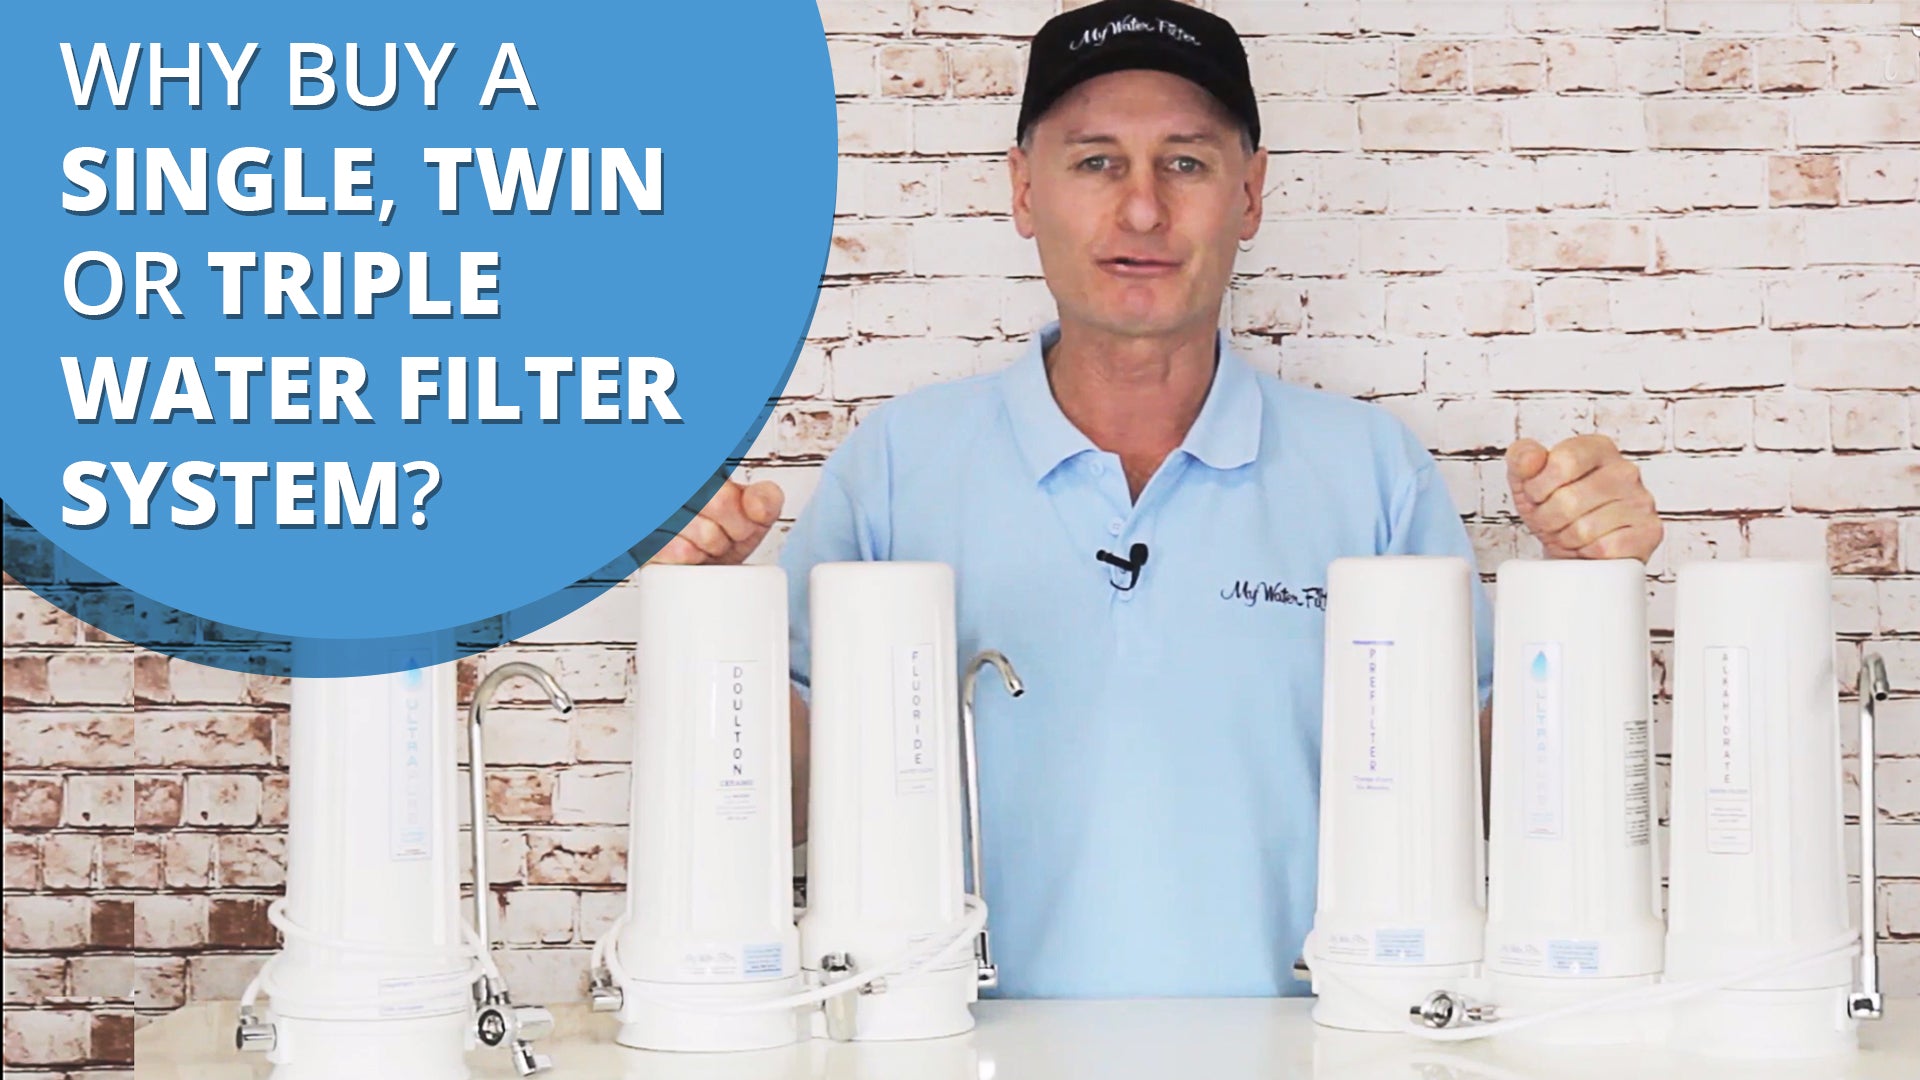 Why Buy a Single, Twin or Triple Water Filter System? [VIDEO] 